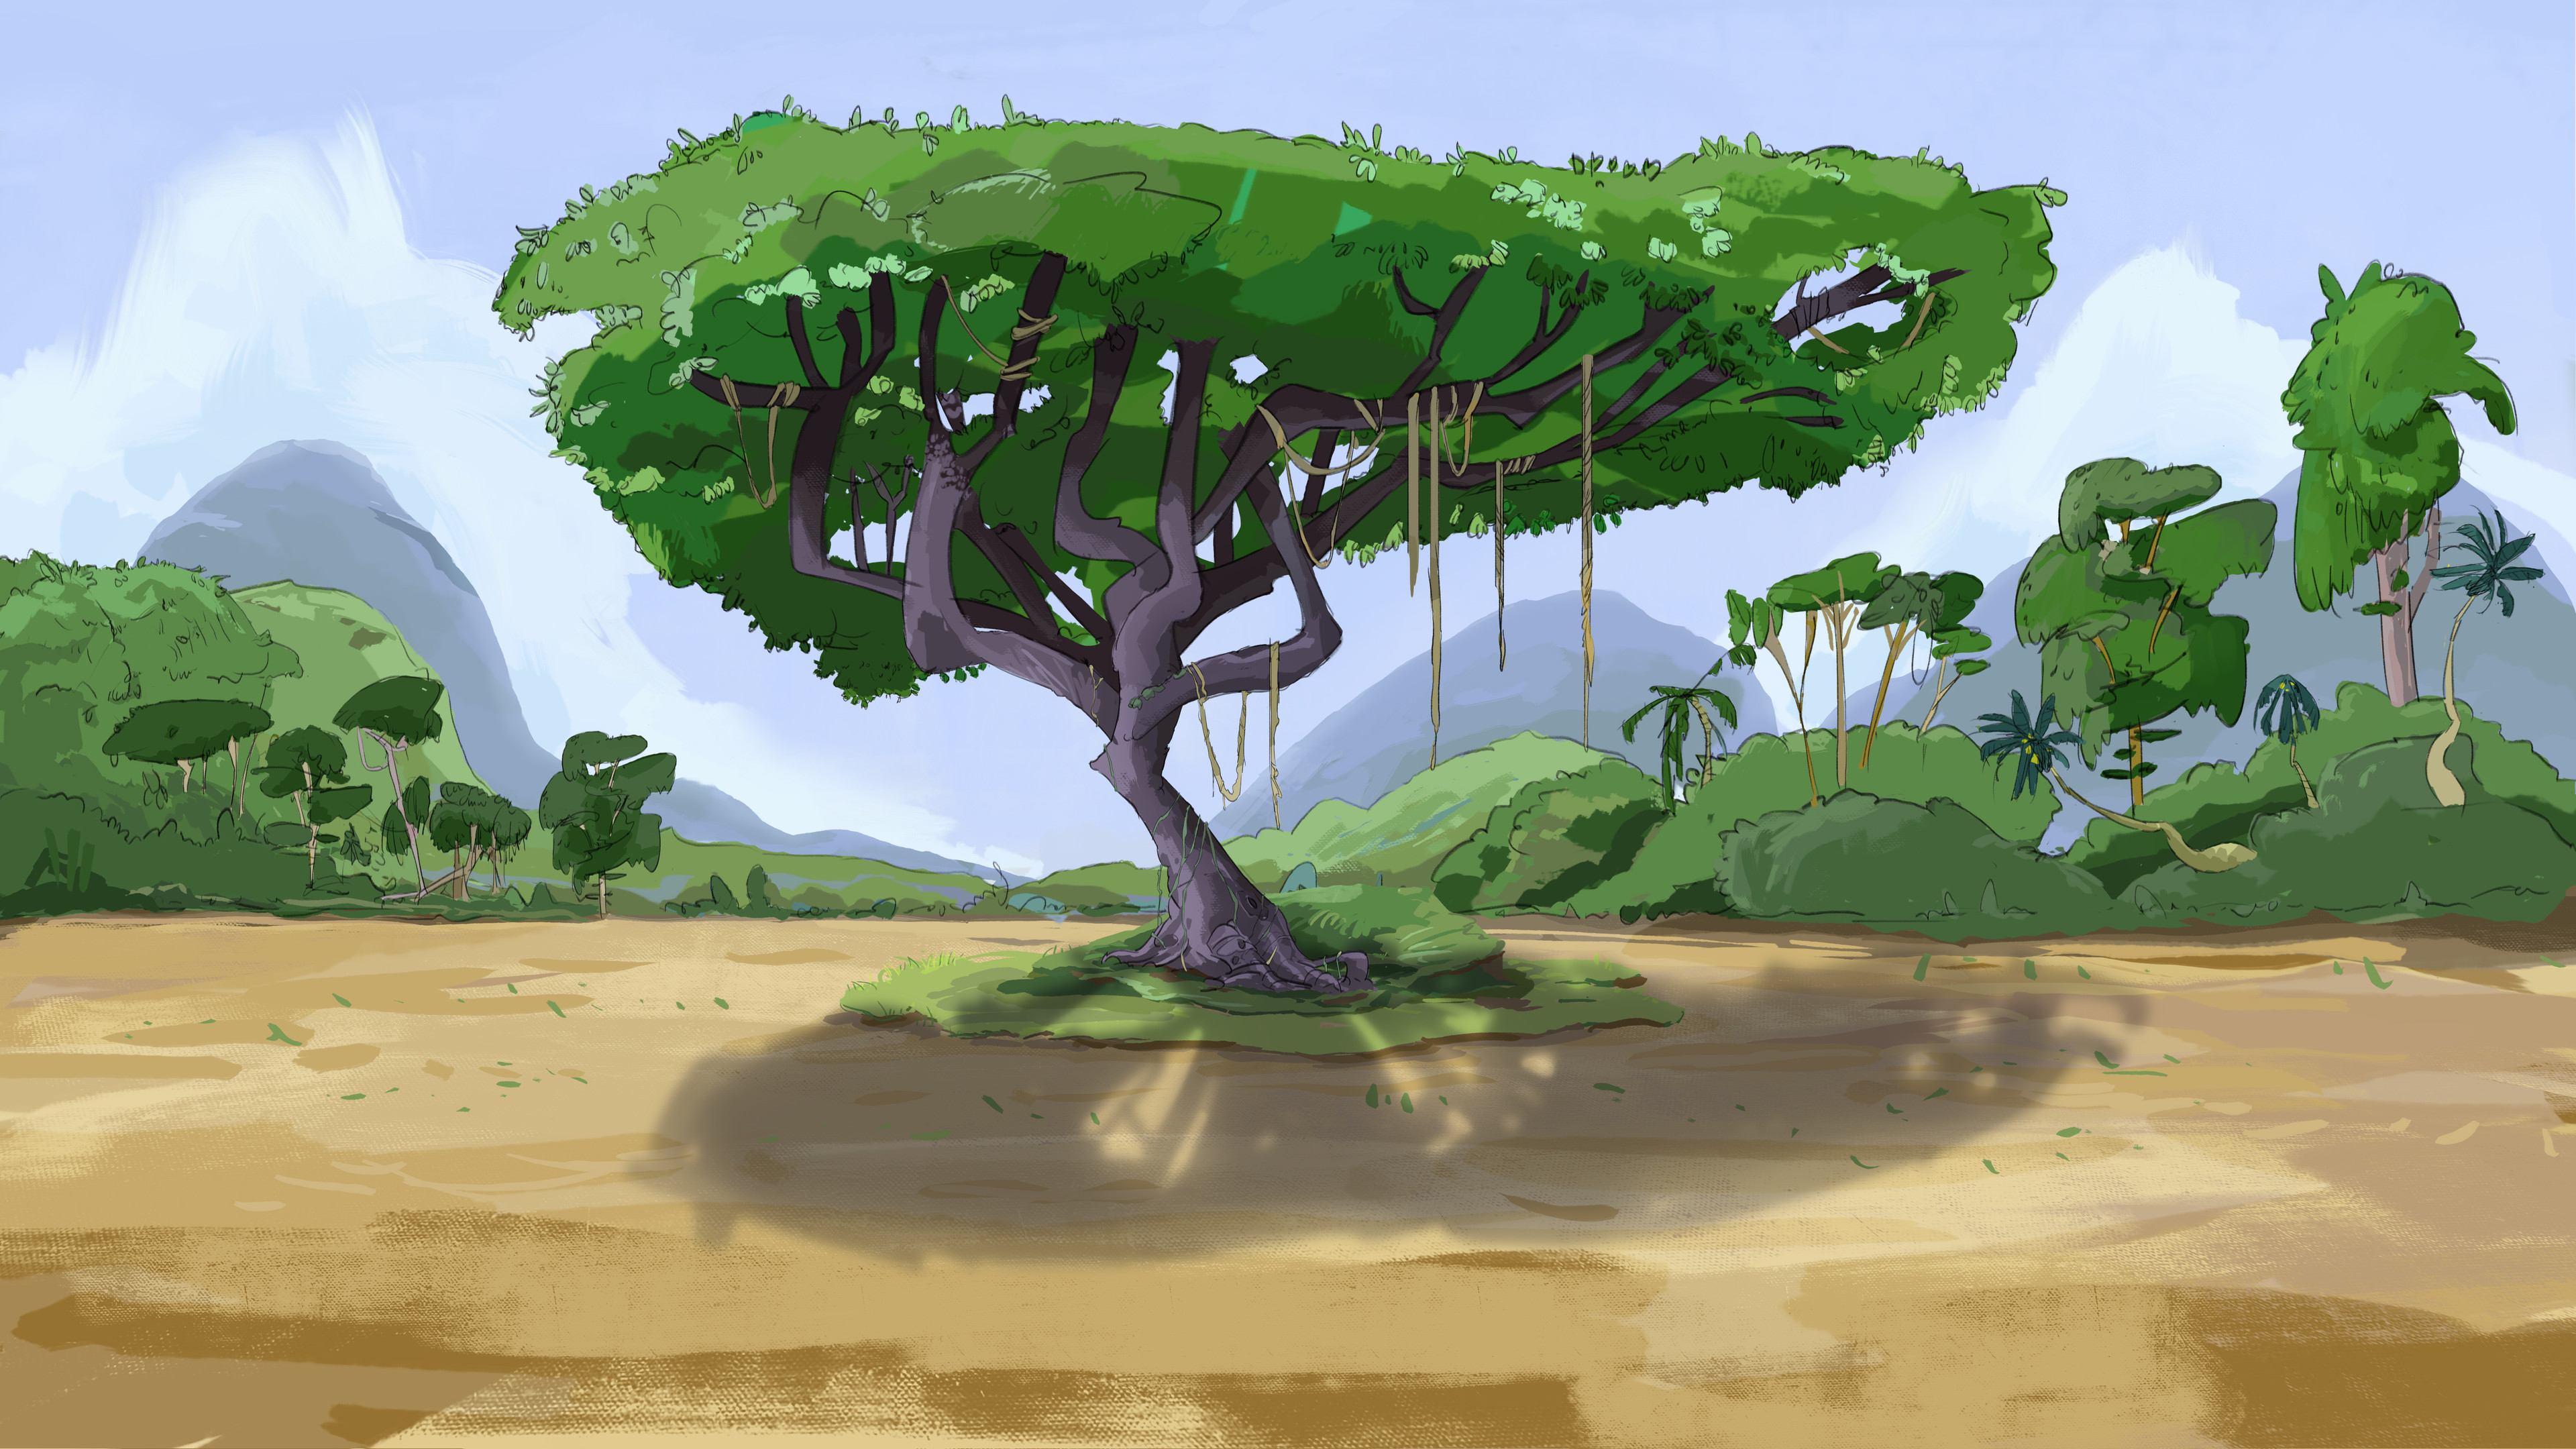 Tree - day time - background design 